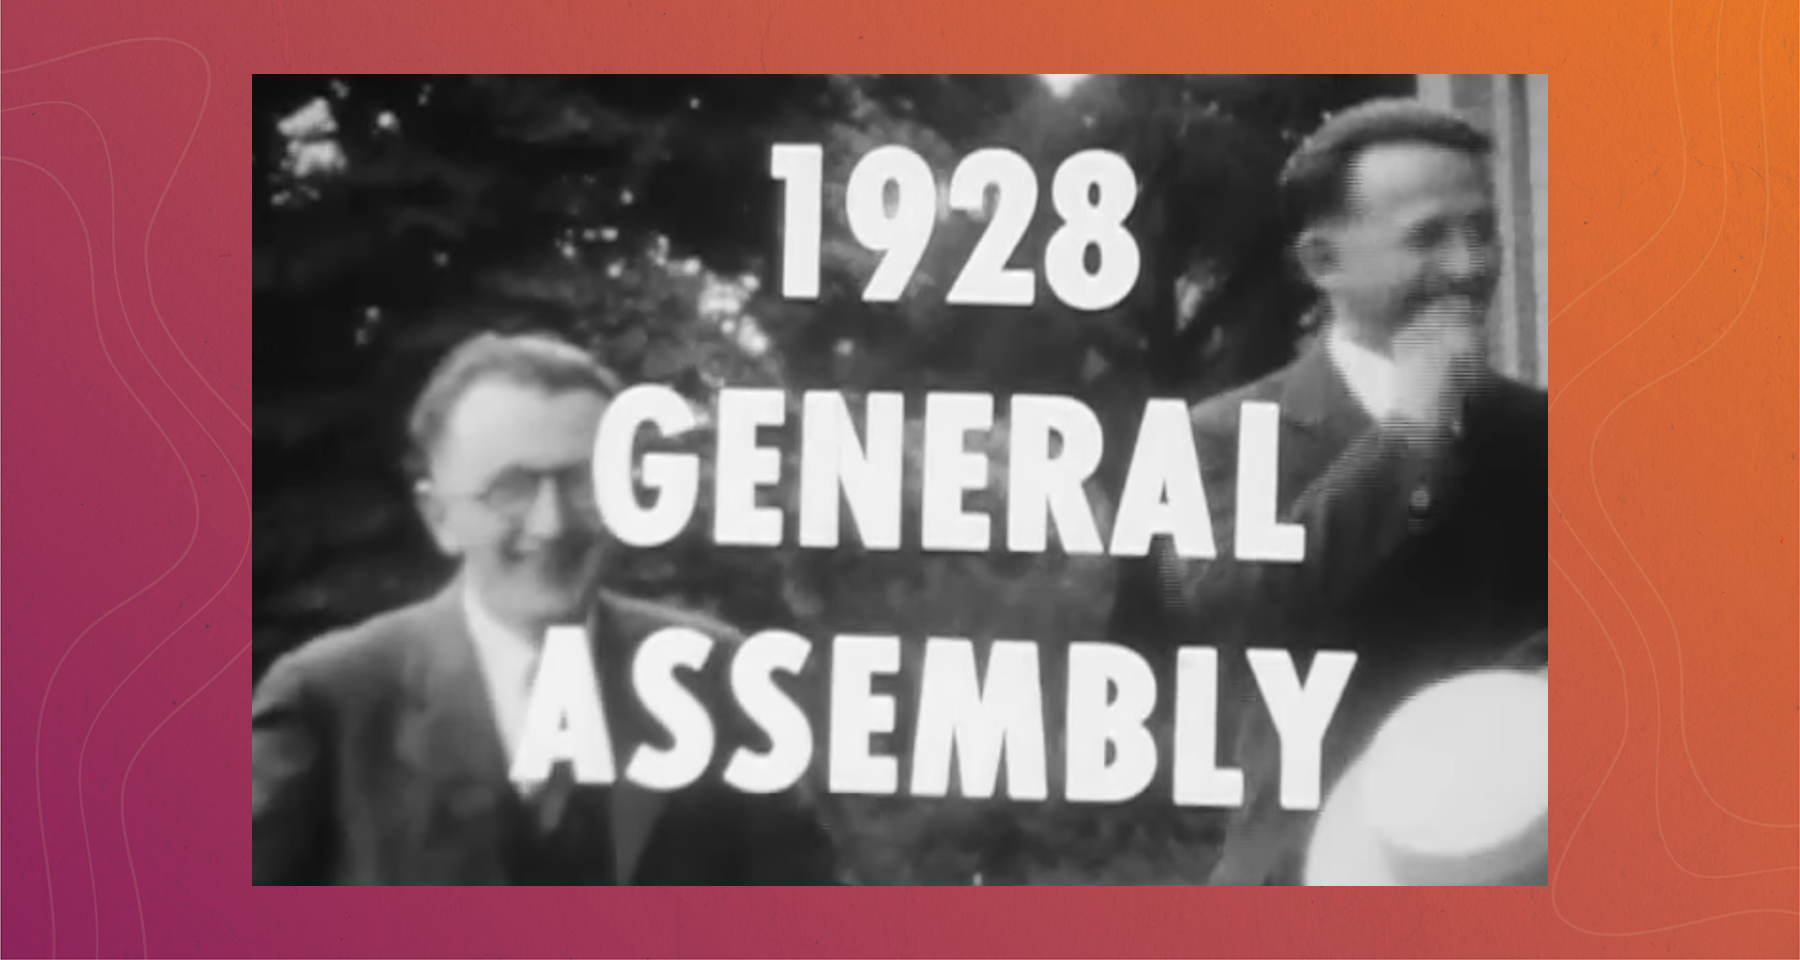 Nazarene Archives uncovers 94yearold footage of 1928 General Assembly